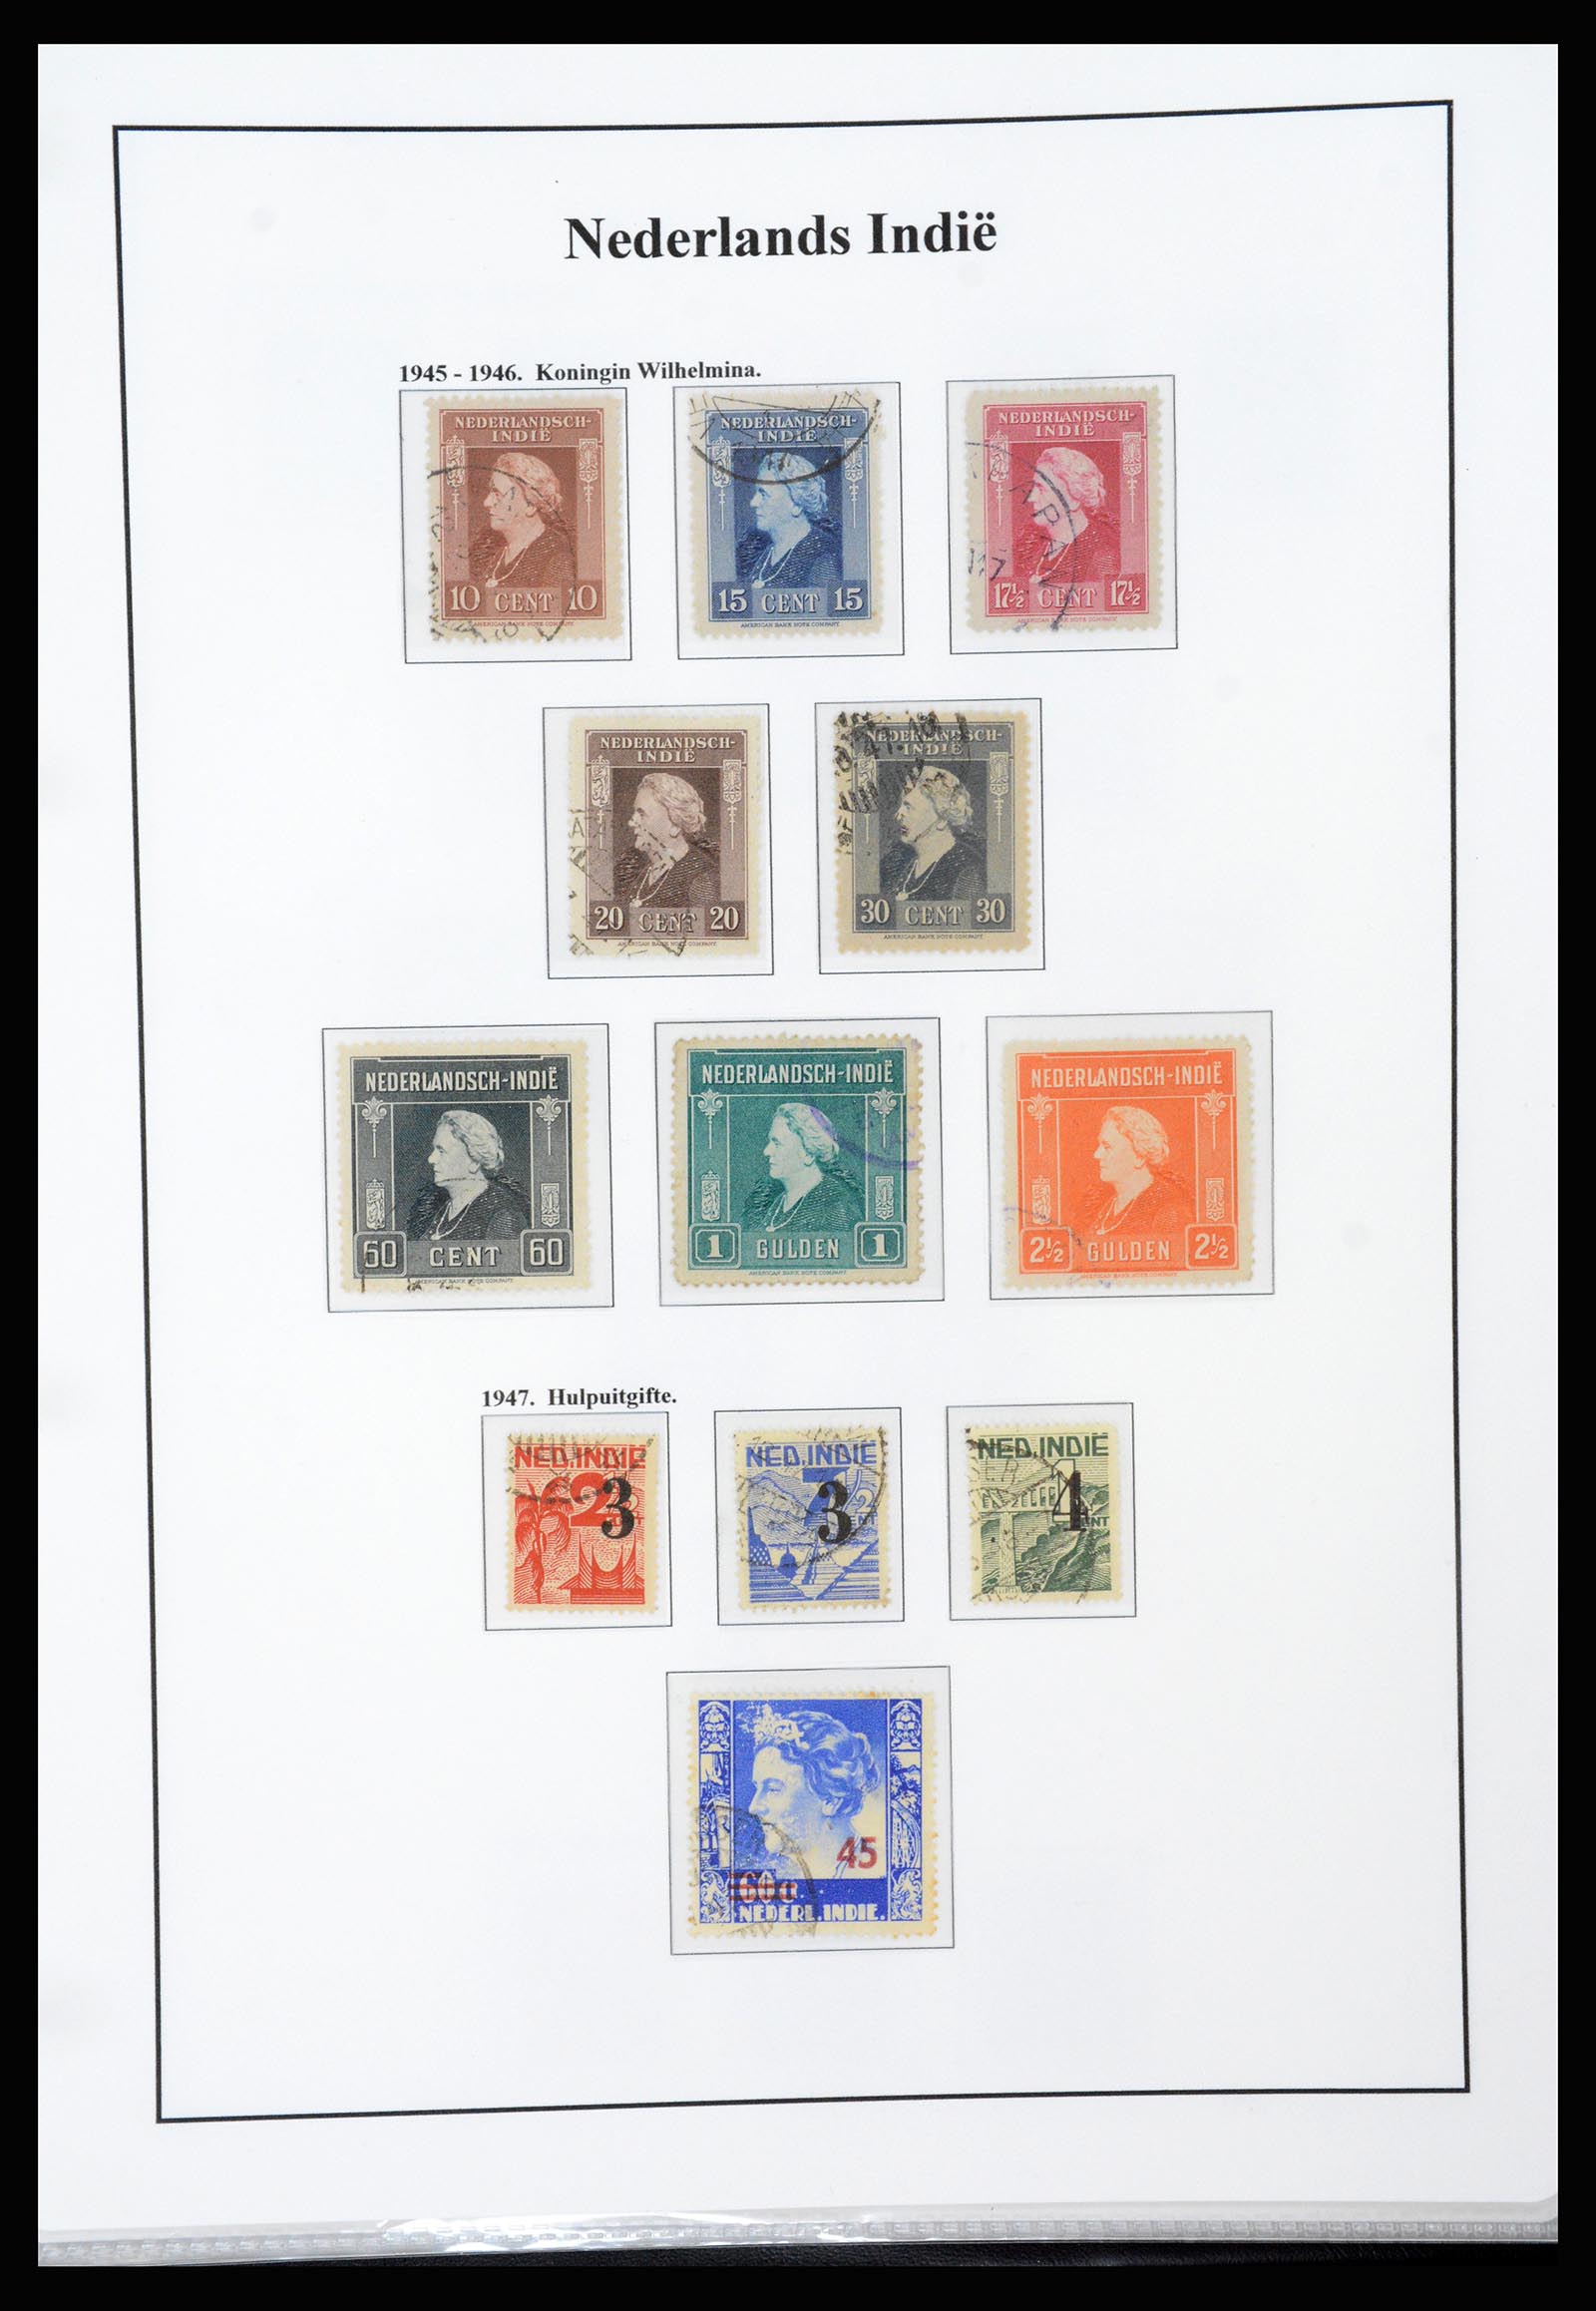 37247 025 - Stamp collection 37247 Dutch east Indies 1864-1949.